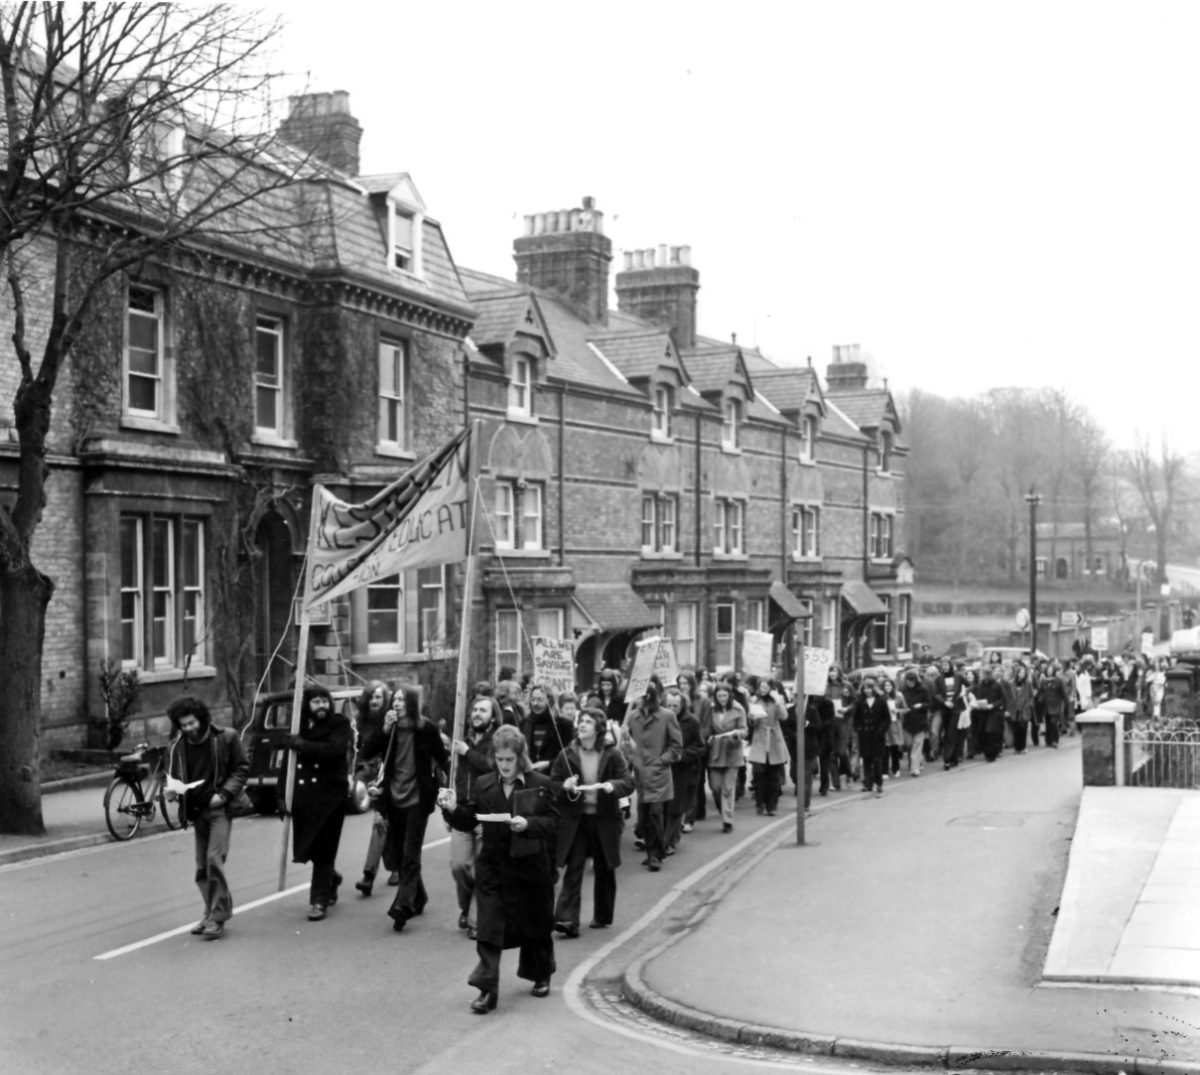 Were you on this protest march in Grantham?